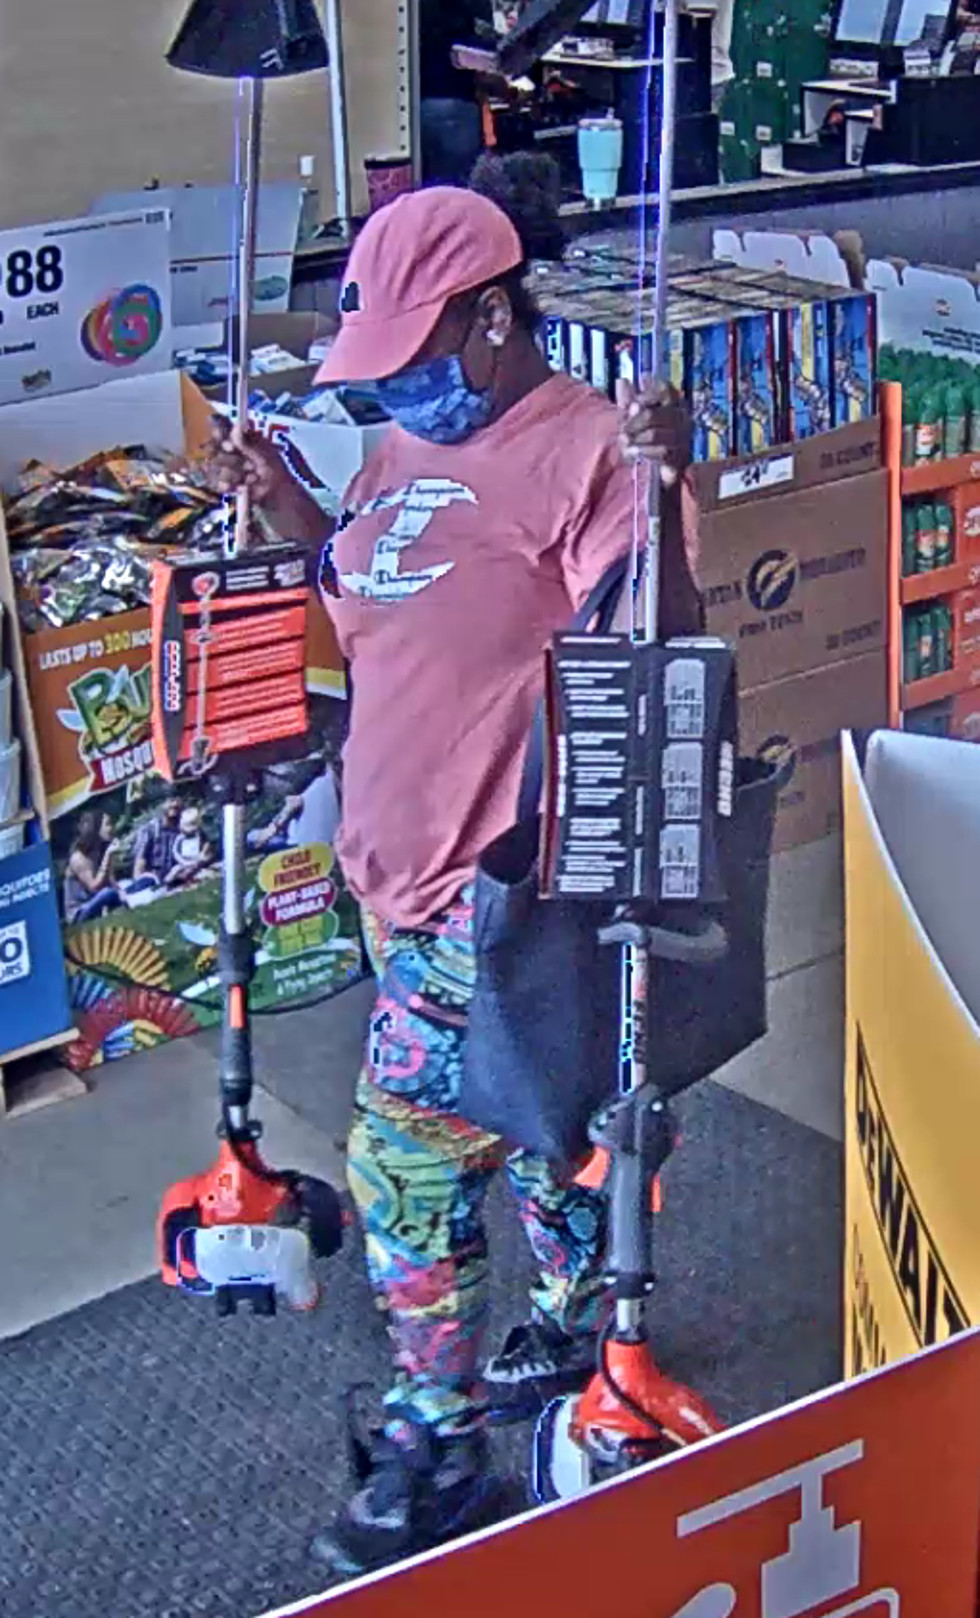 Shreveport Police Hunting for Home Depot Thieves